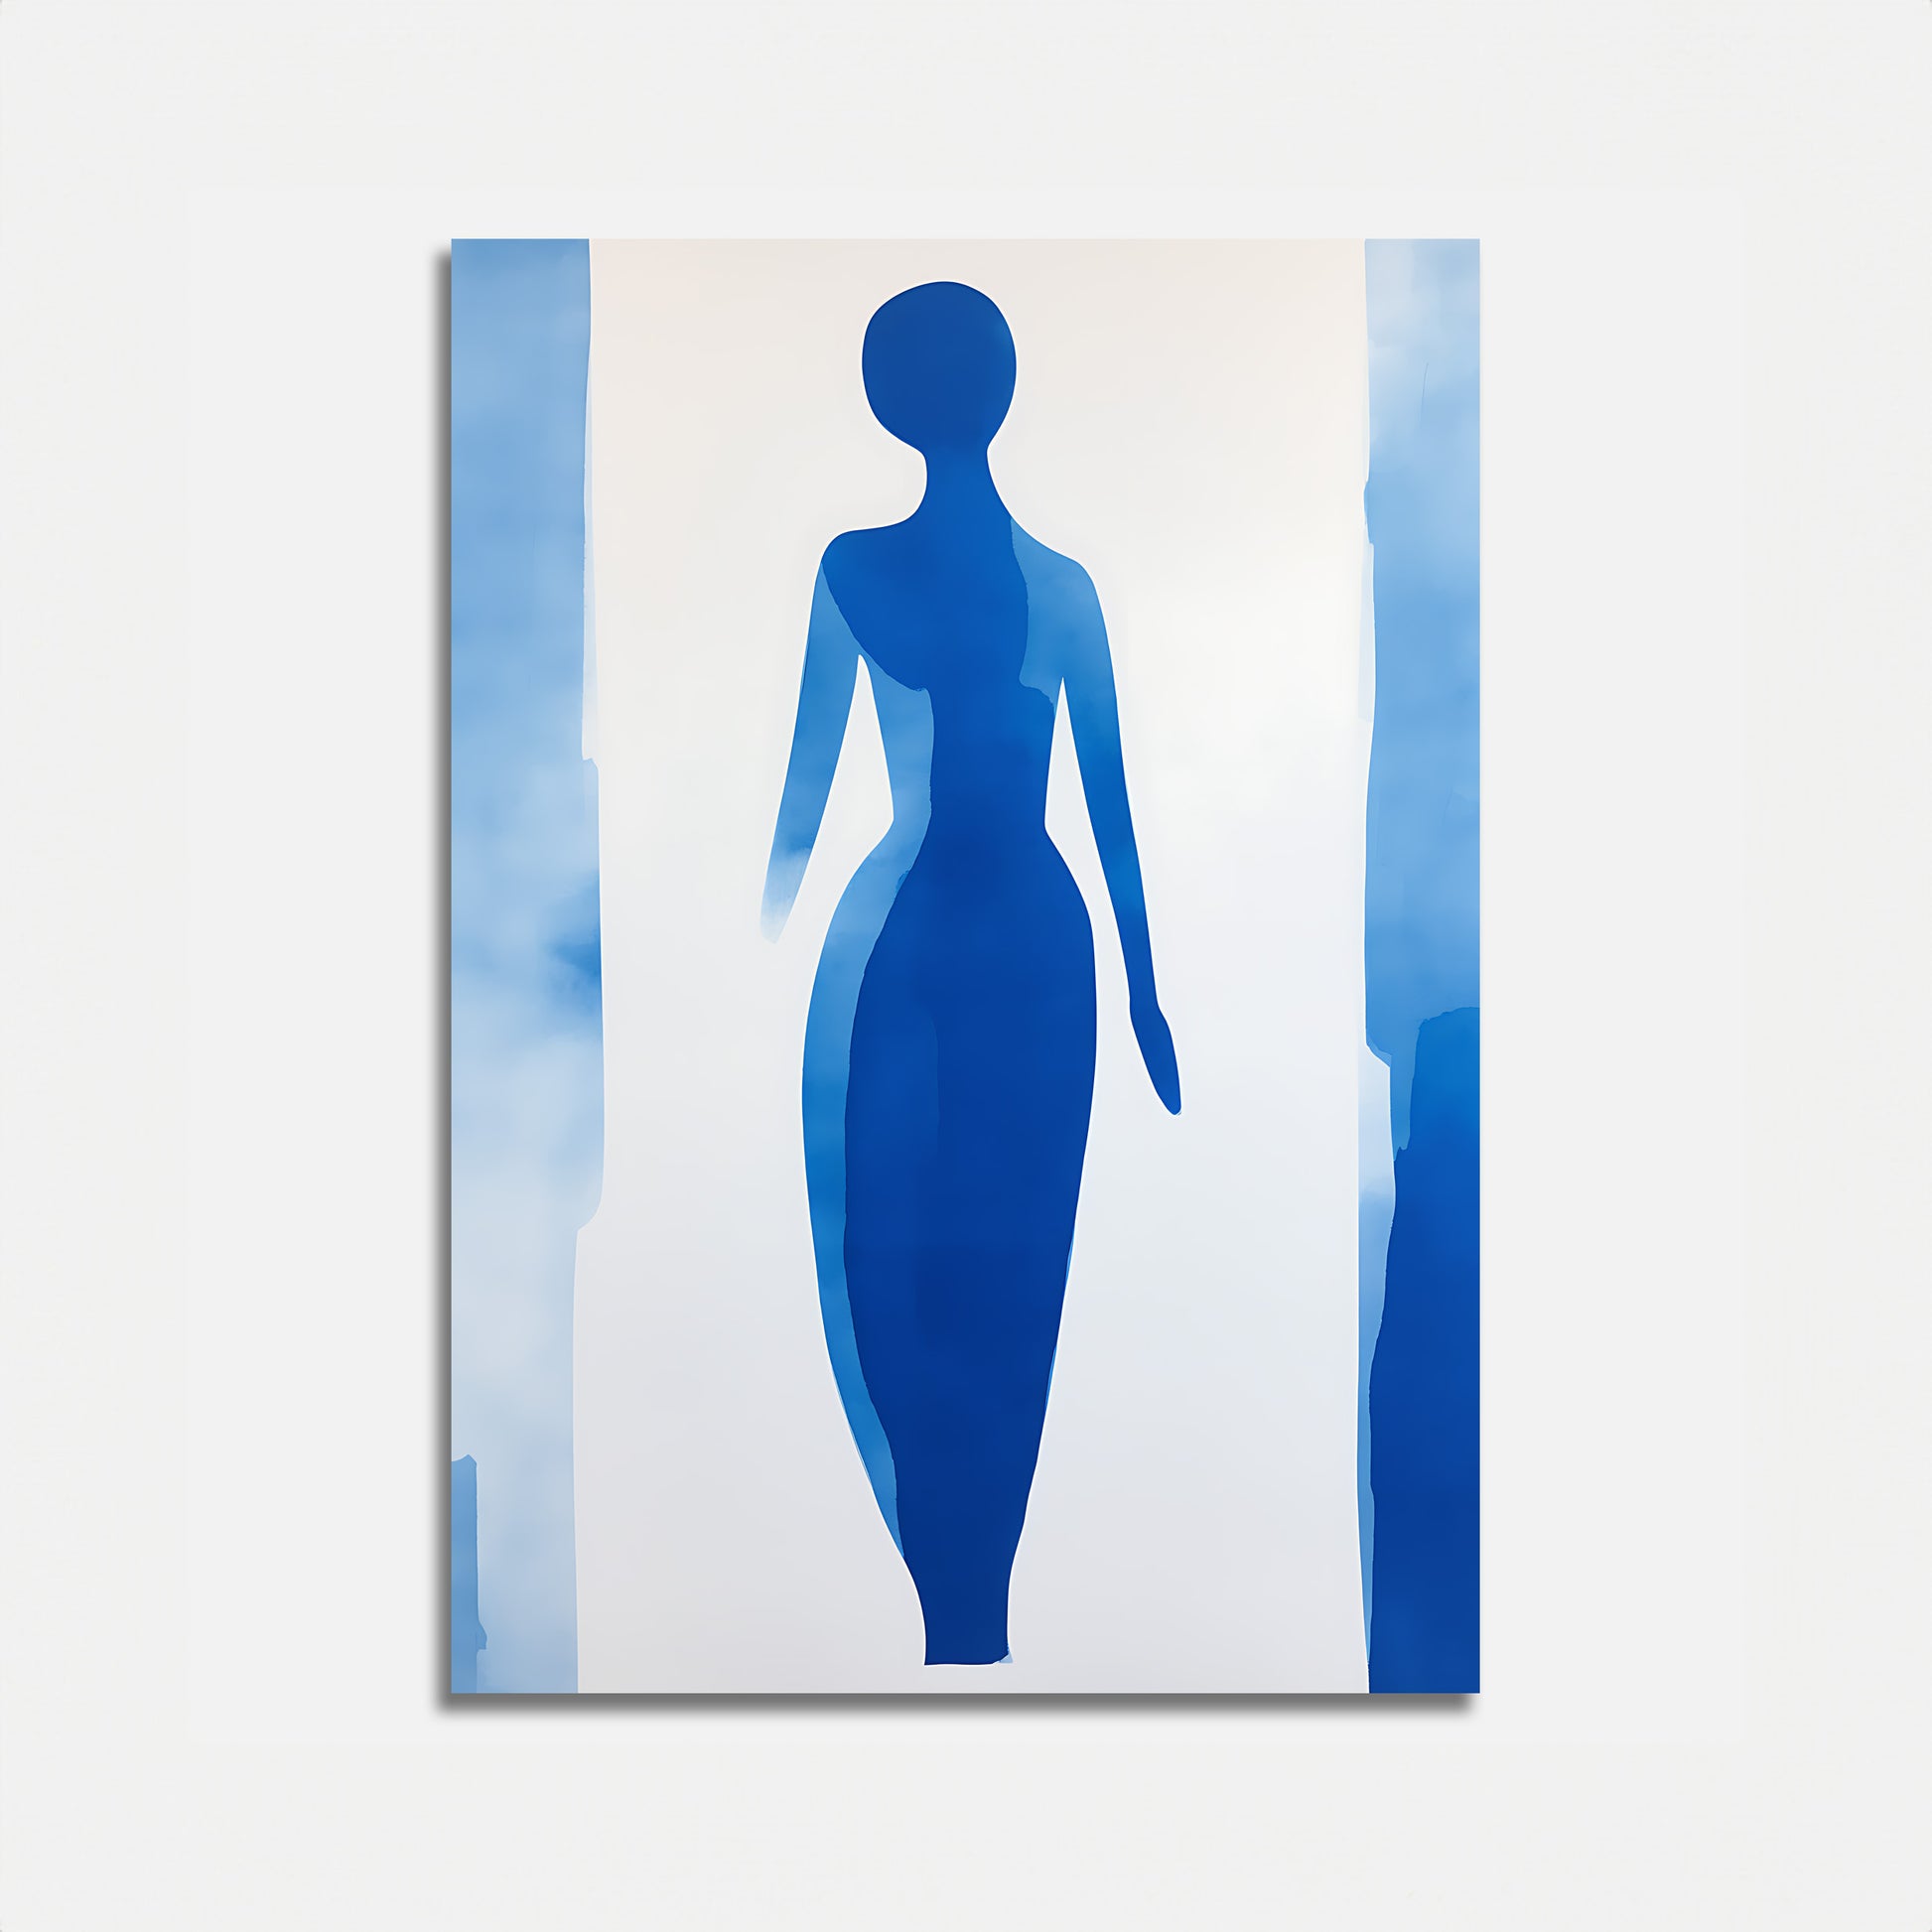 Abstract silhouette of a female figure in blue against a cloudy sky background.